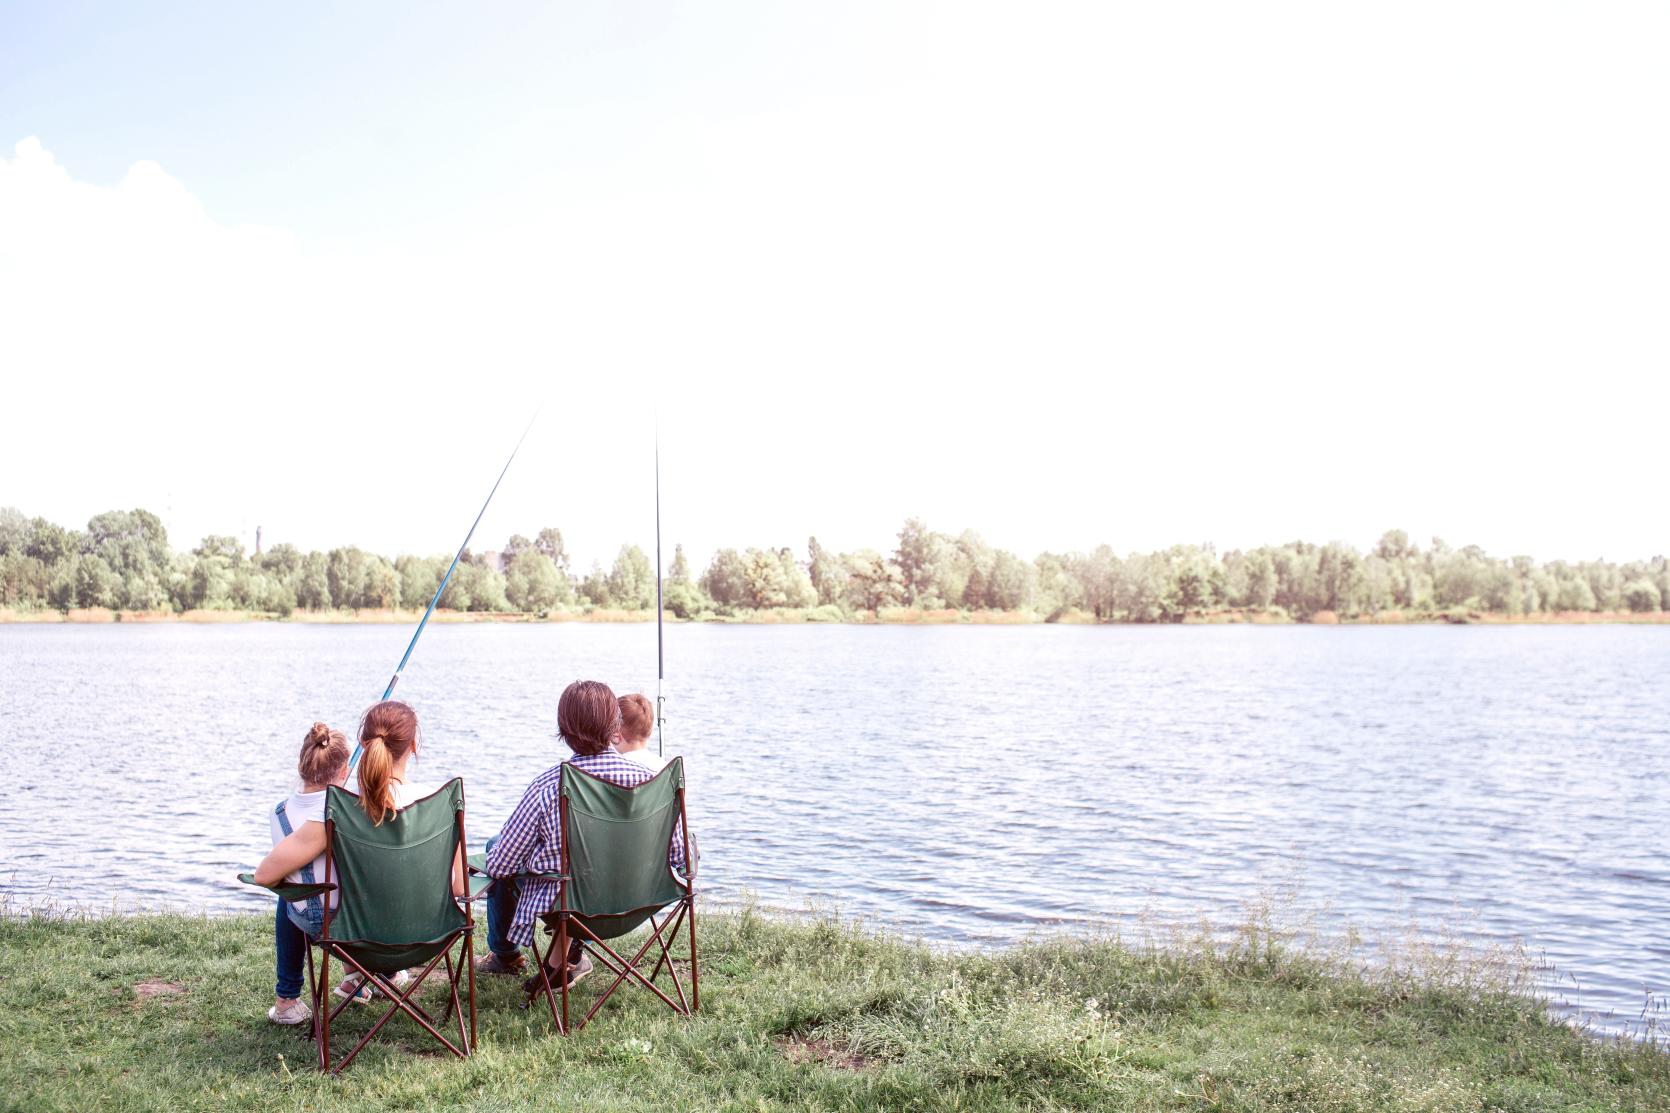 Parents and kids relax and fish from chairs on a bank by the water